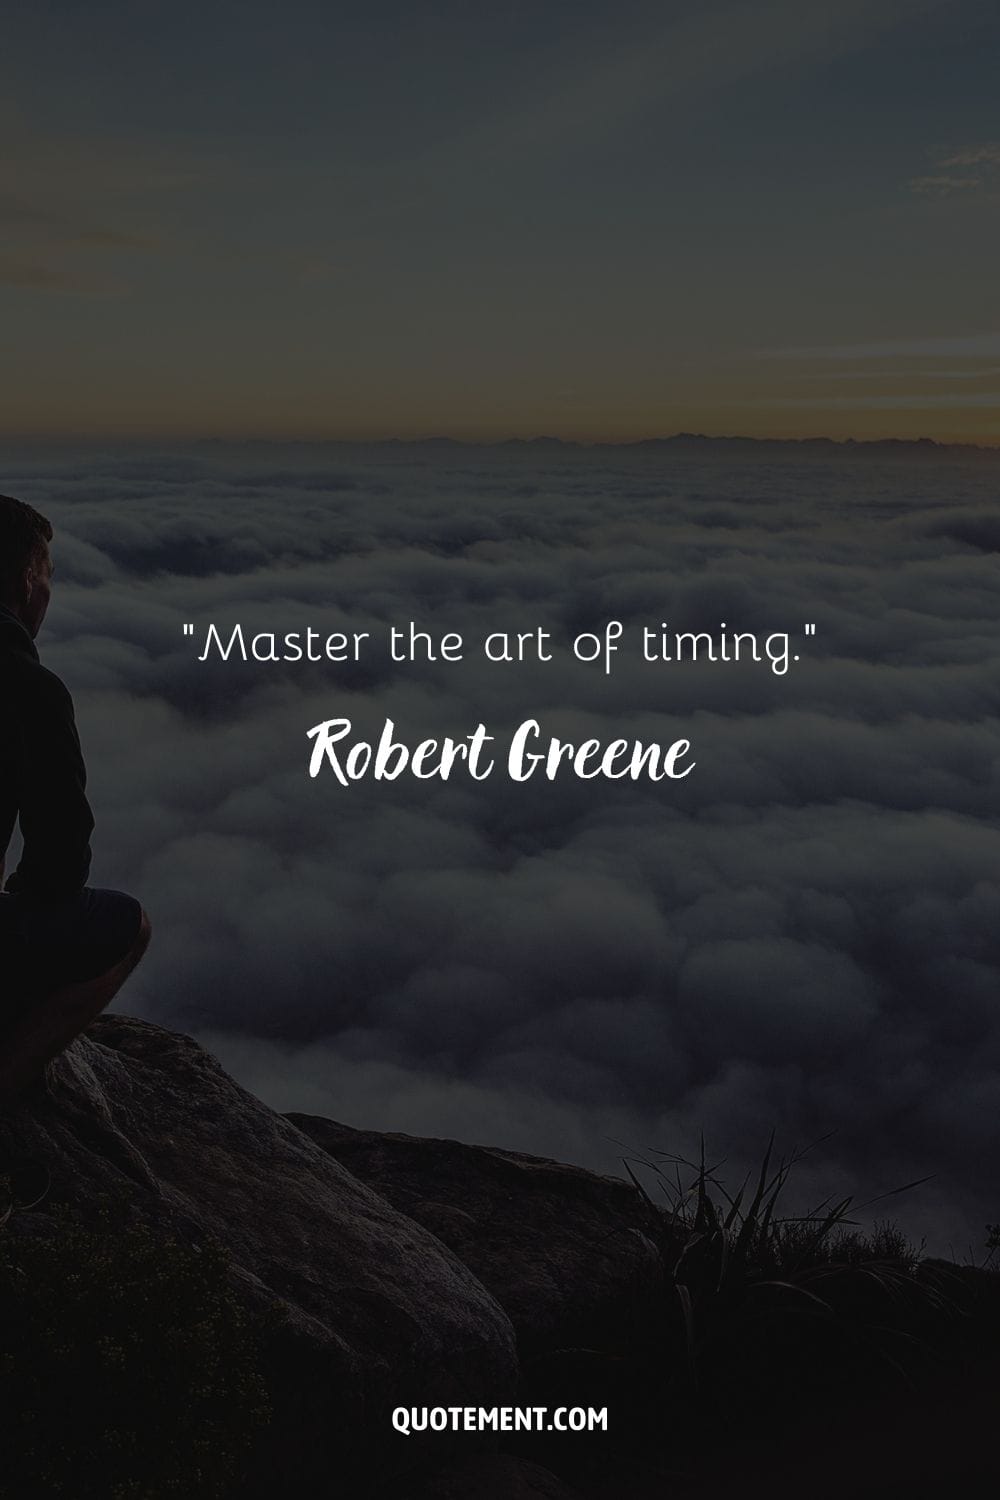 “Master the art of timing.” ― Robert Greene, The 48 Laws of Power